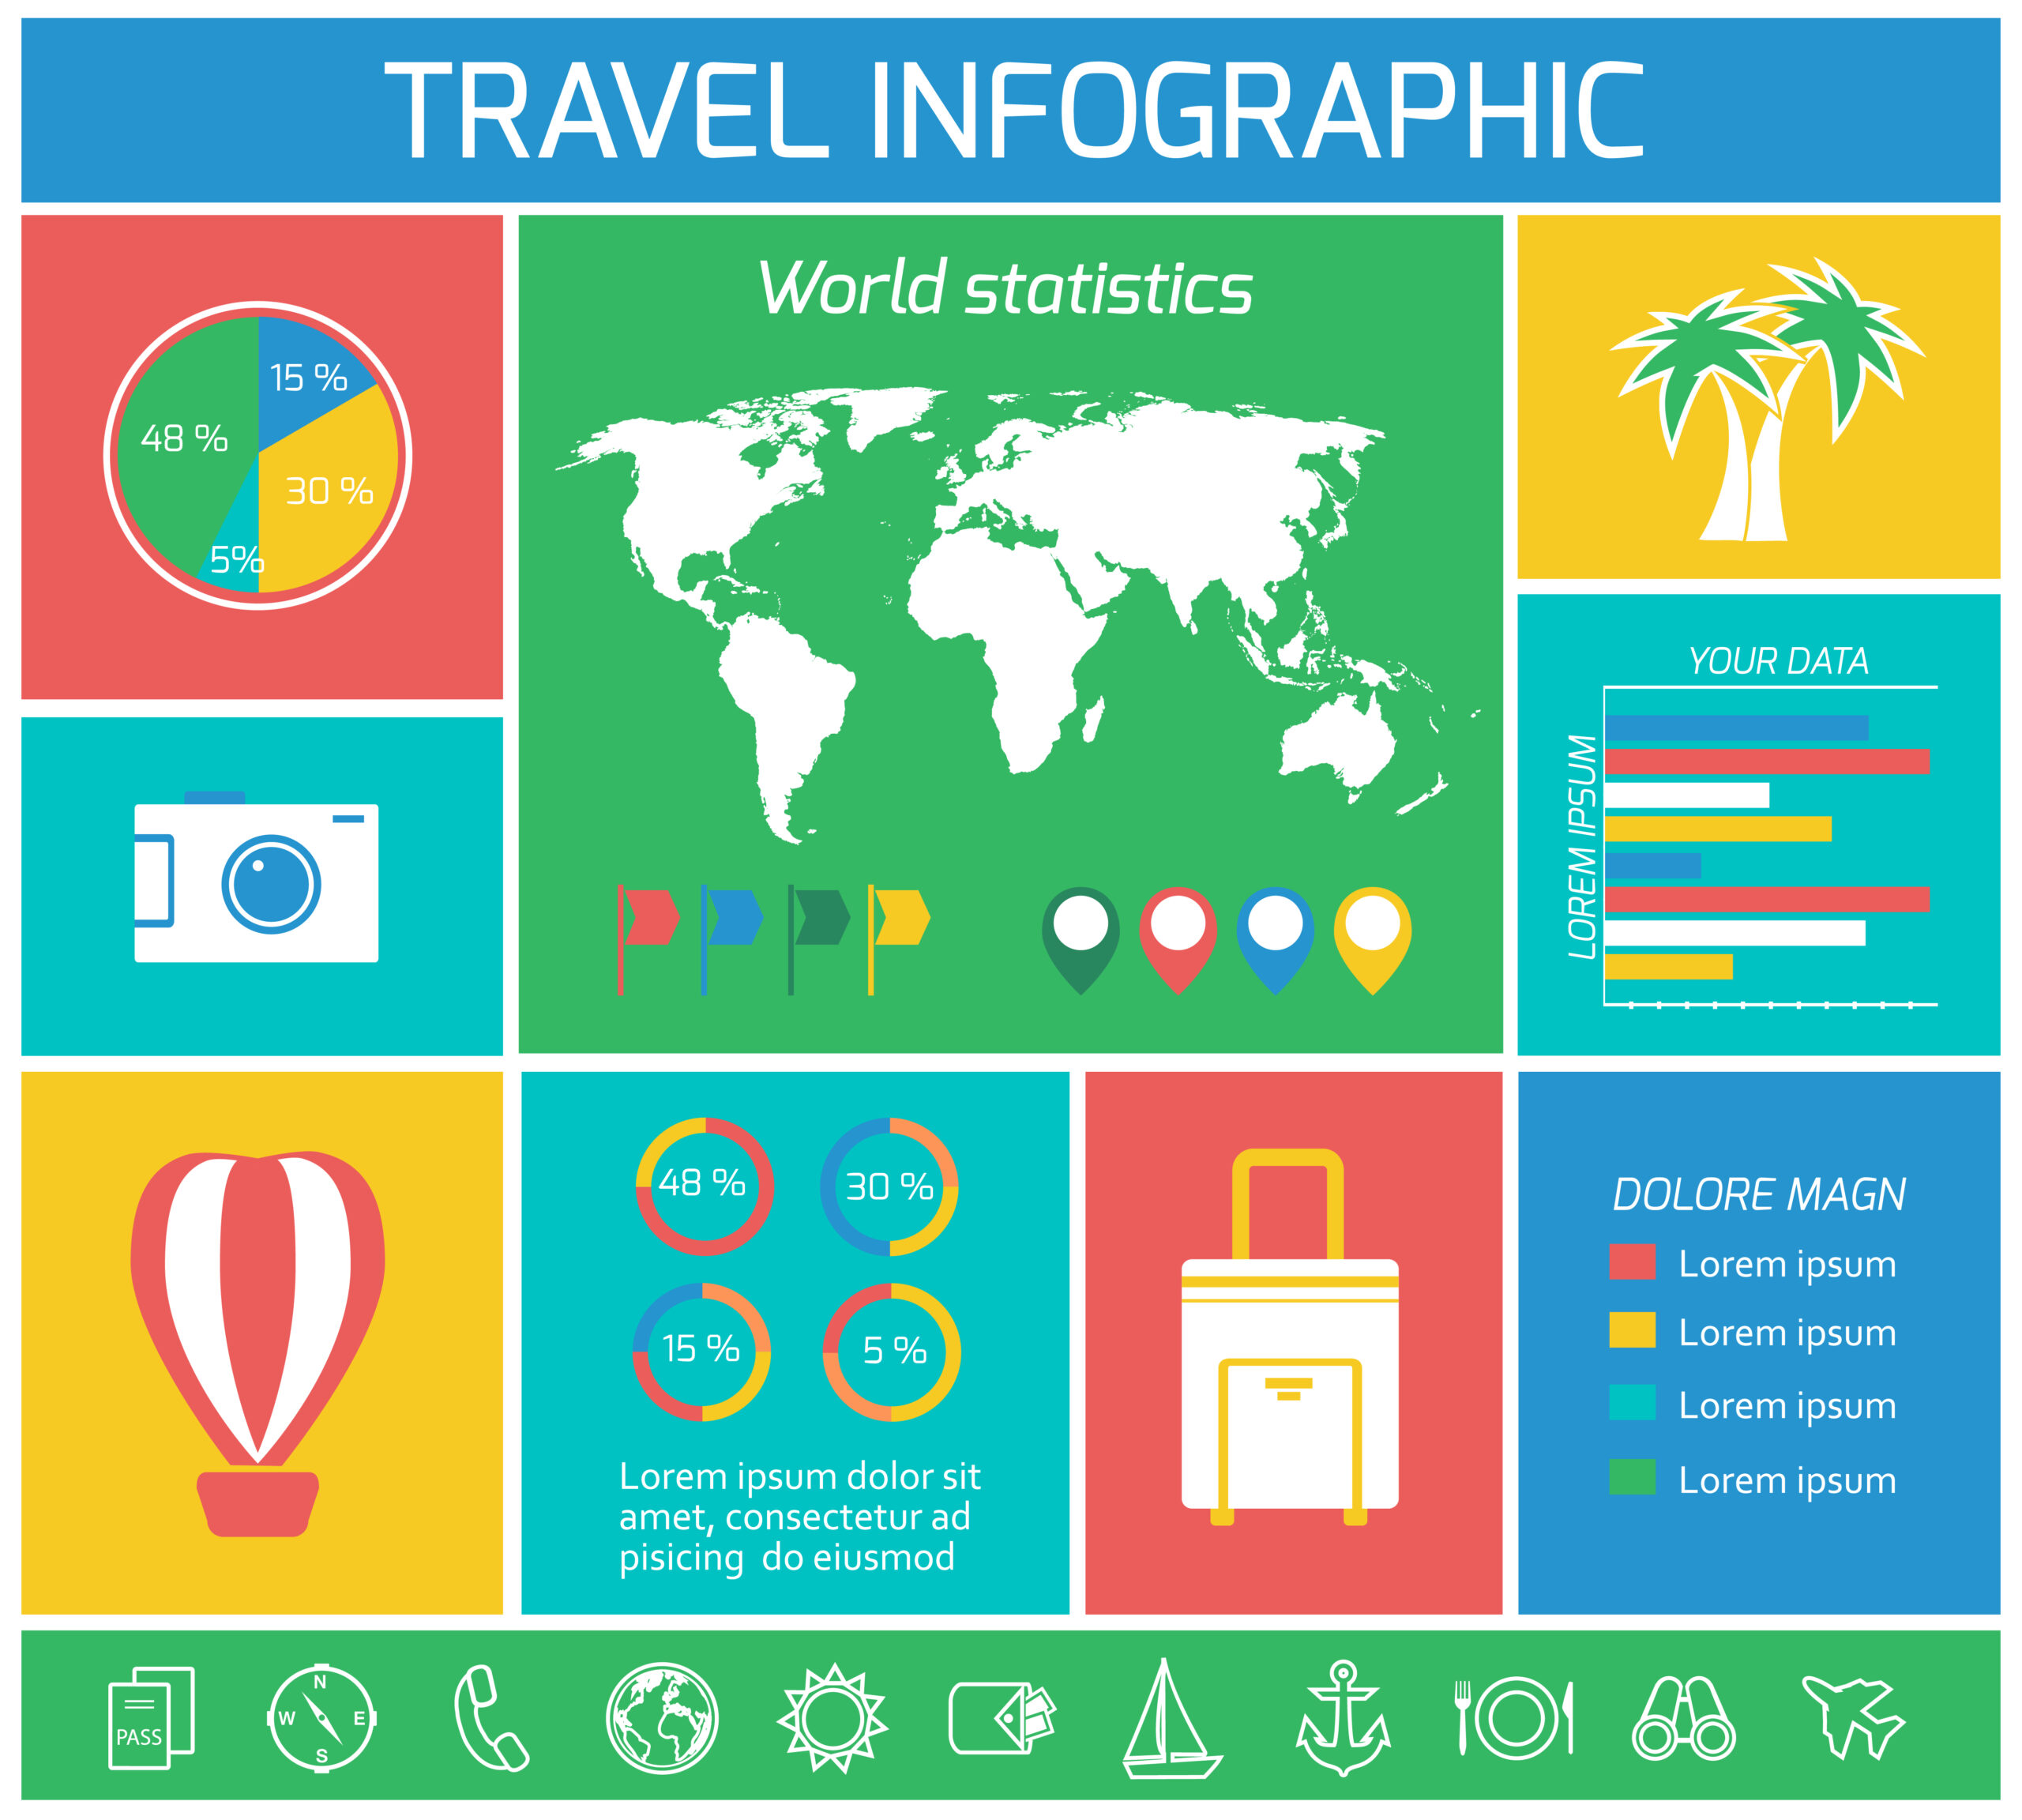 Infographic: Traveling Solo or With a Travel Group?